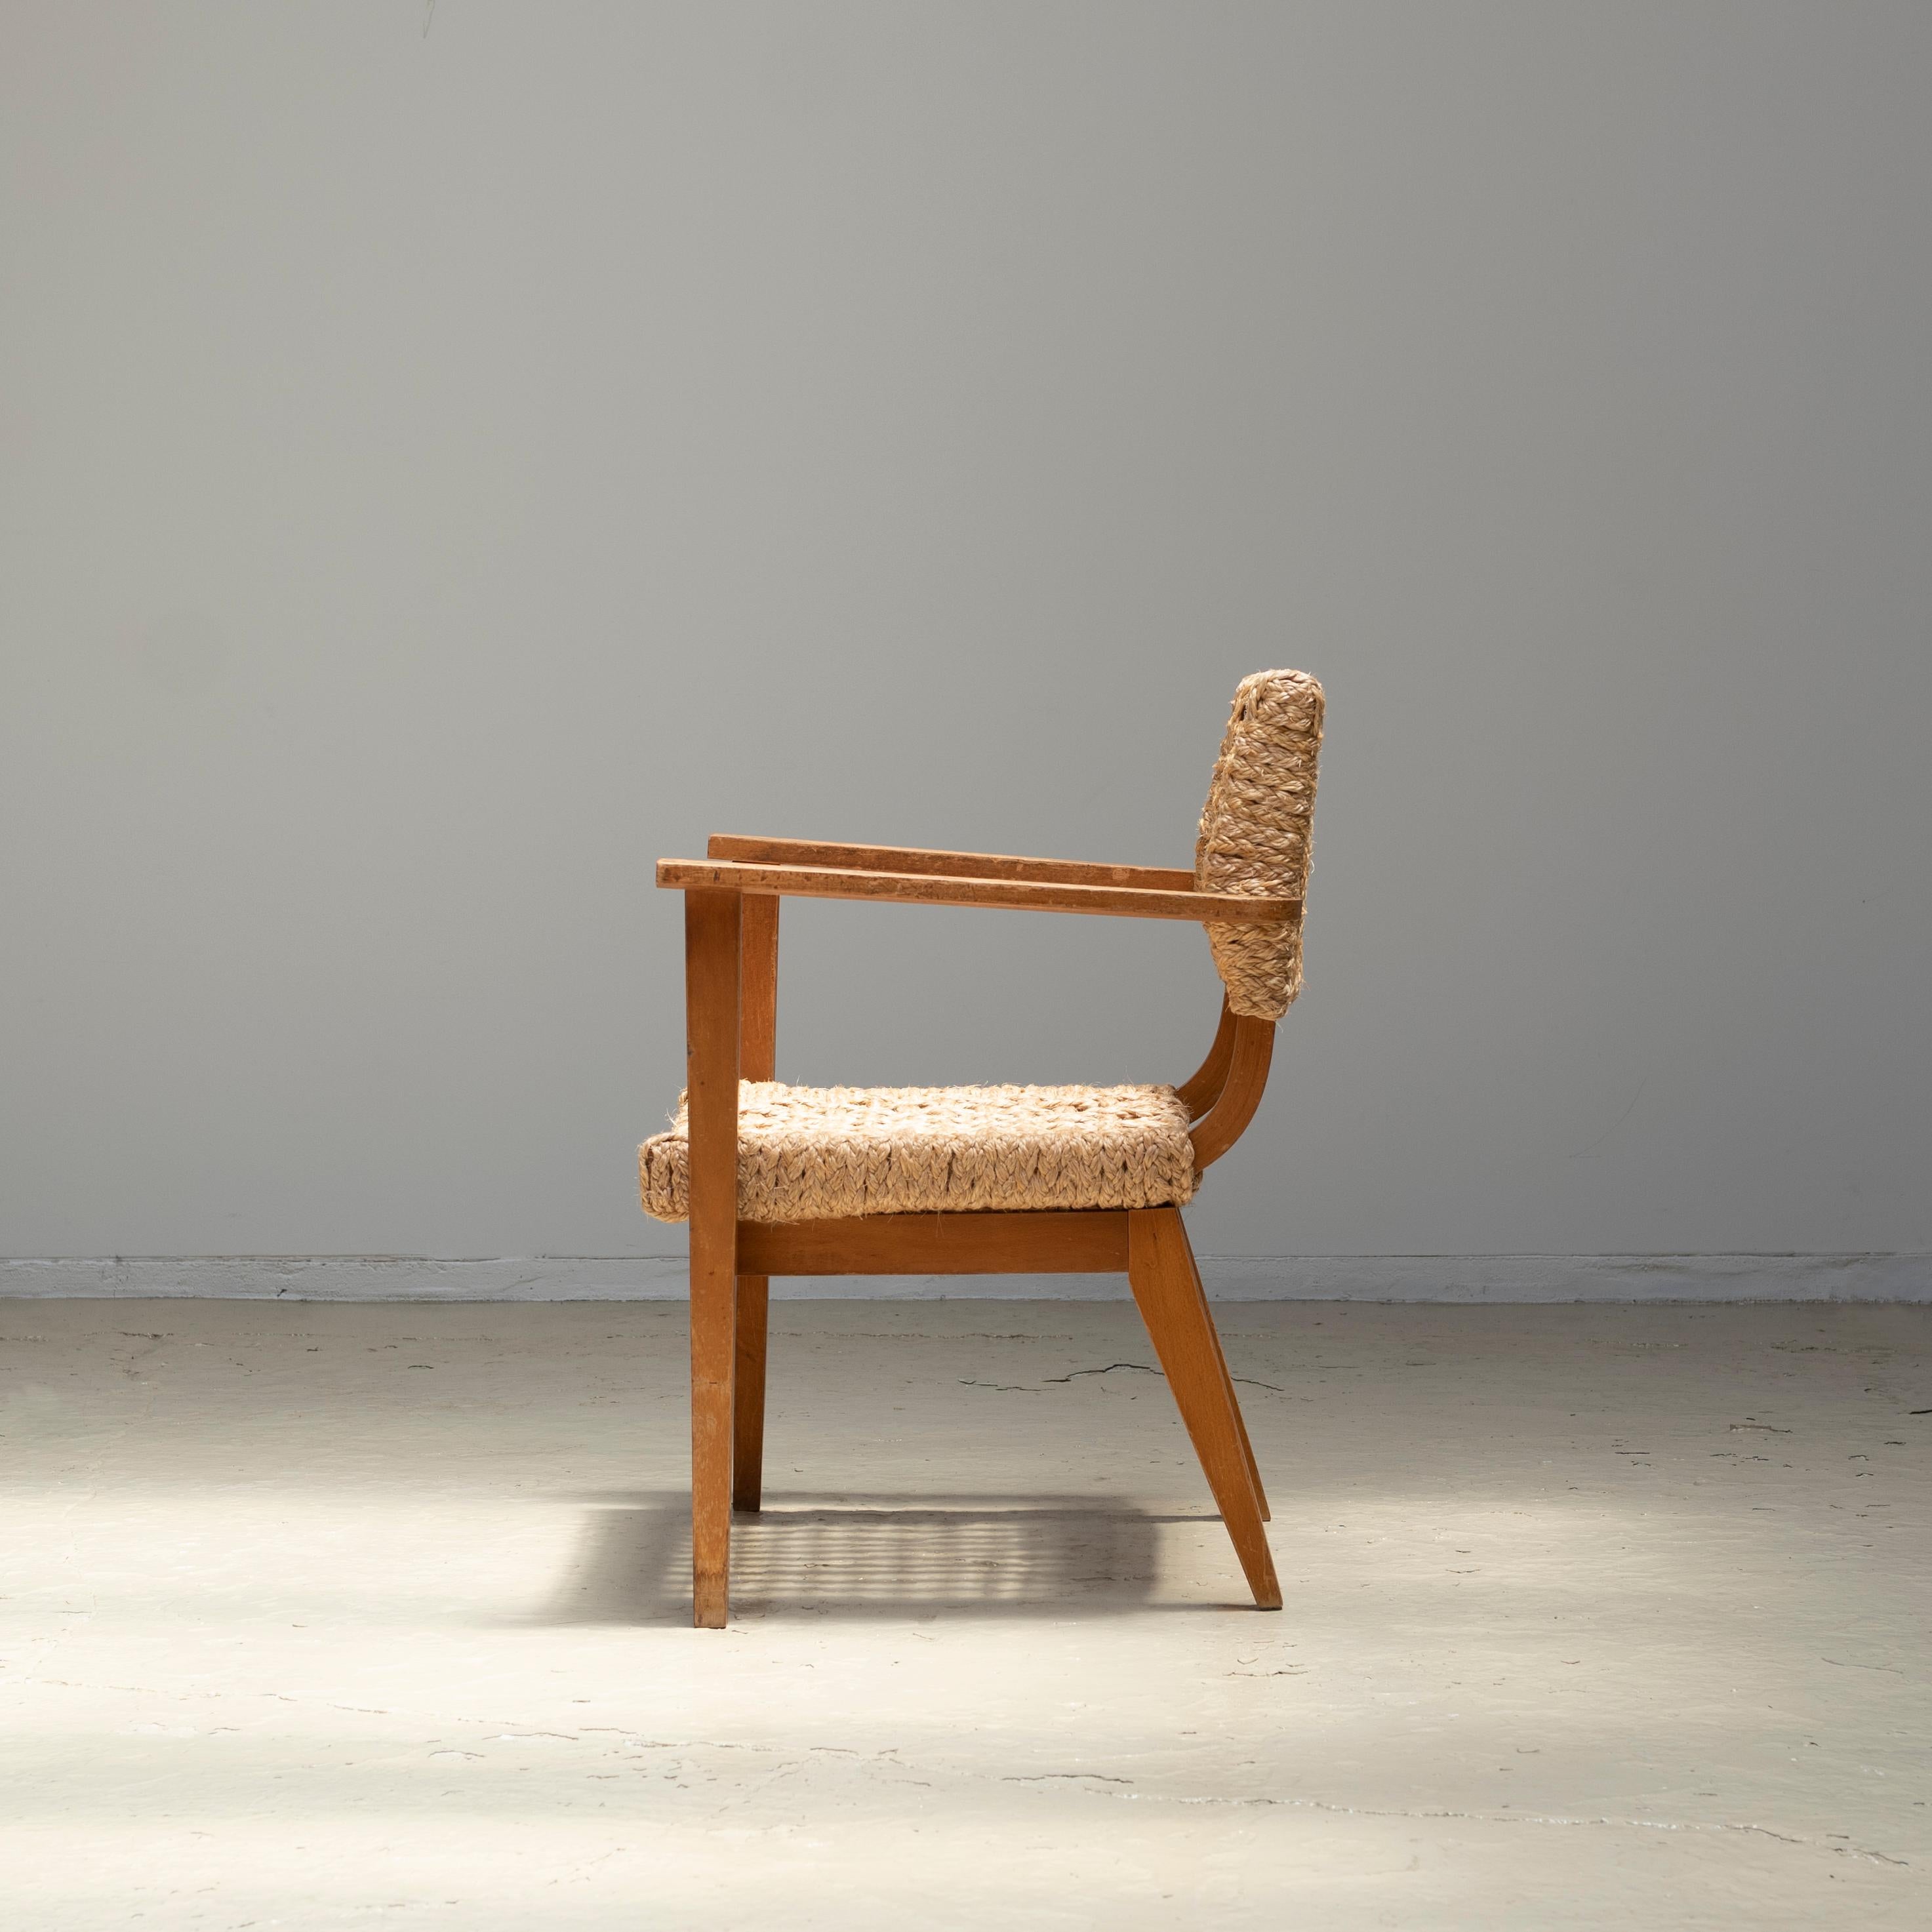 French Audoux Minet Armchair, Beech & Woven Rope, 1950s For Sale